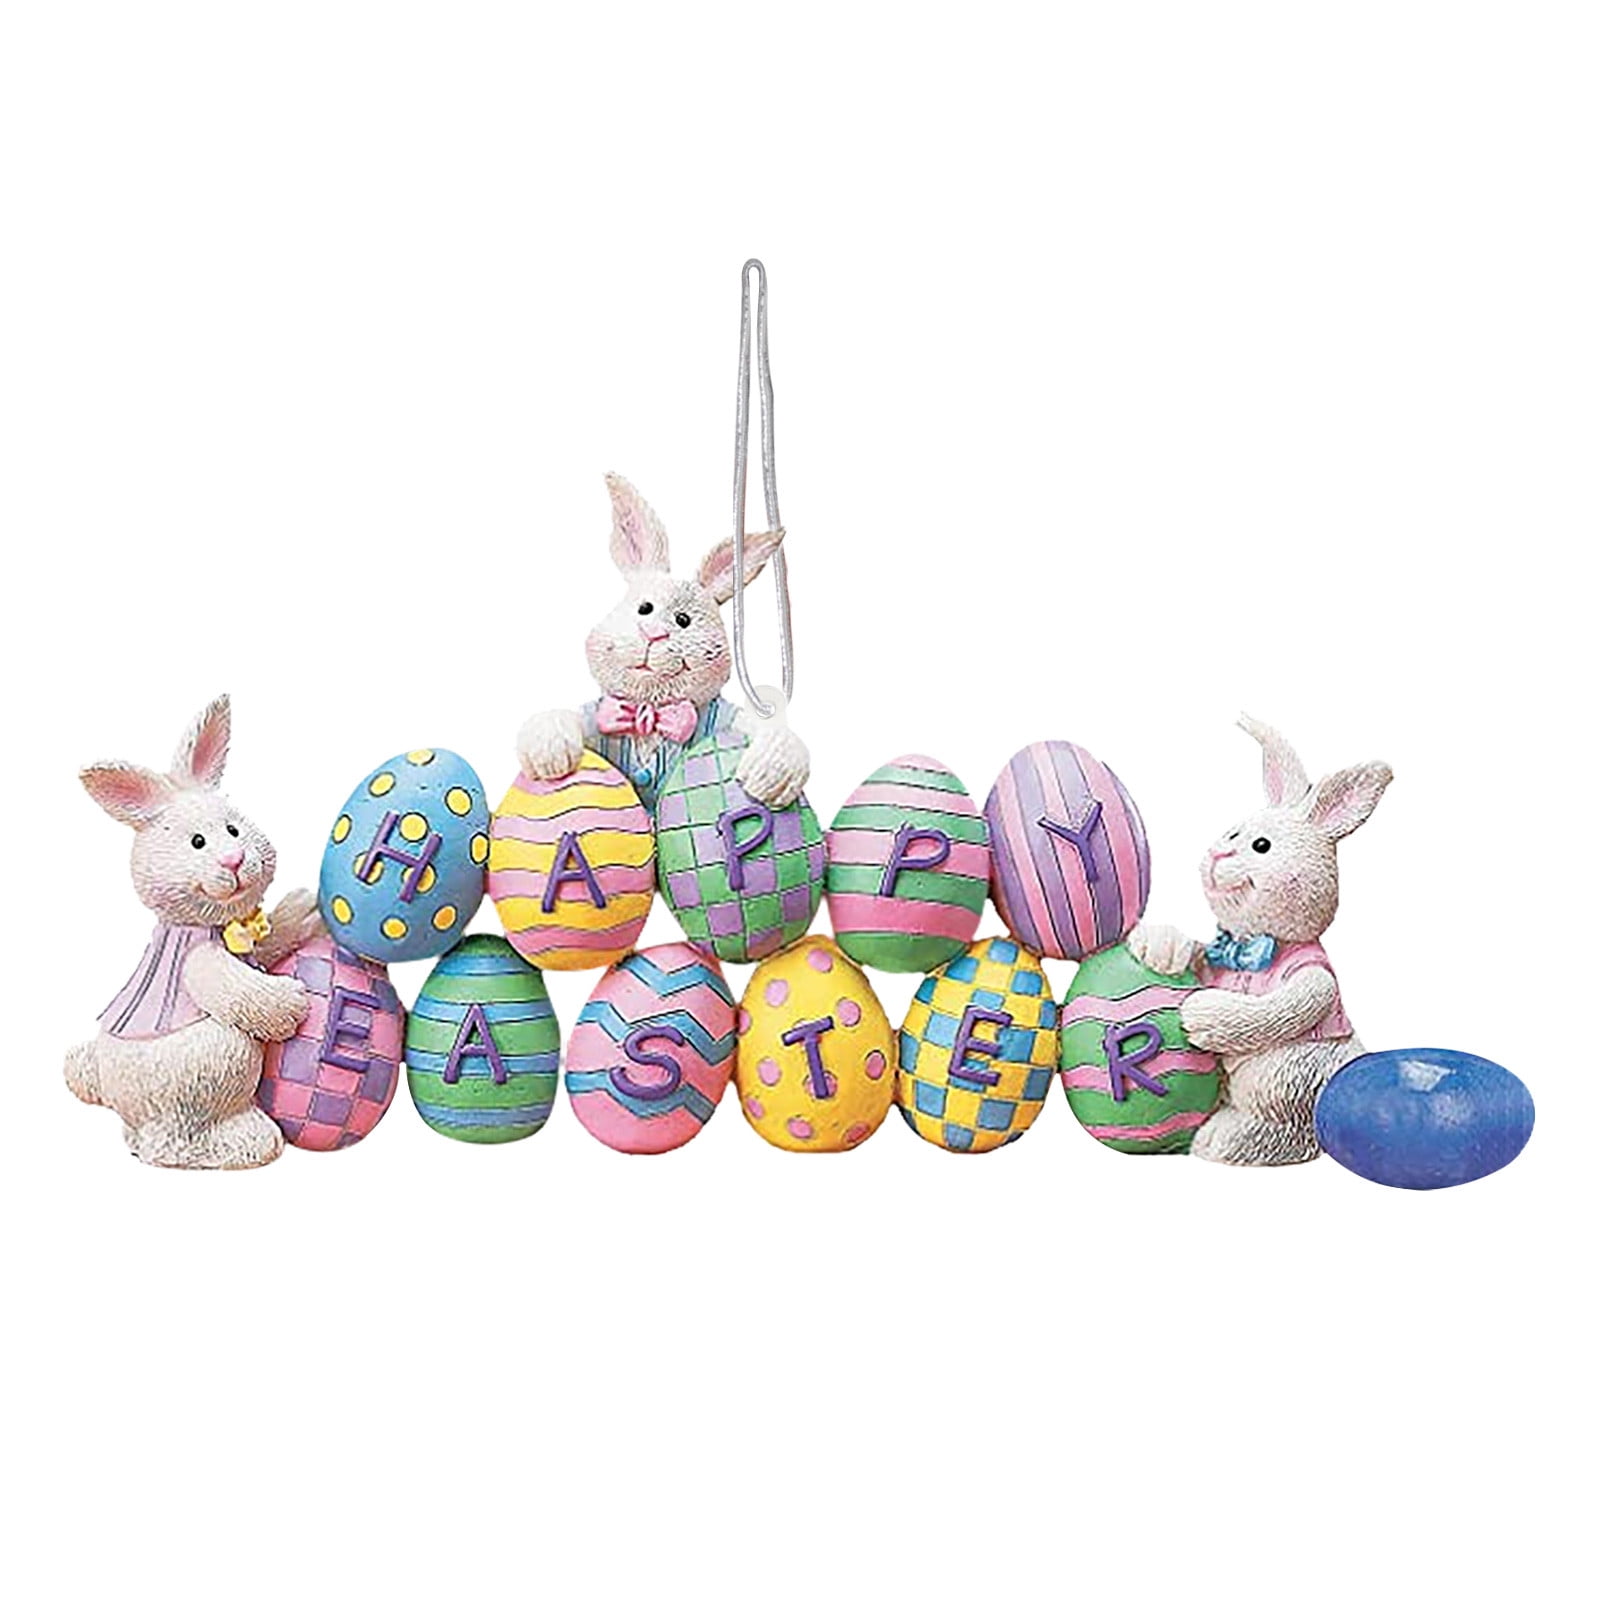 COLORFUL EASTER EGGS BUNNIES FLOWERS WINDOW CLINGS INDOOR DECORATION 14 PCS 